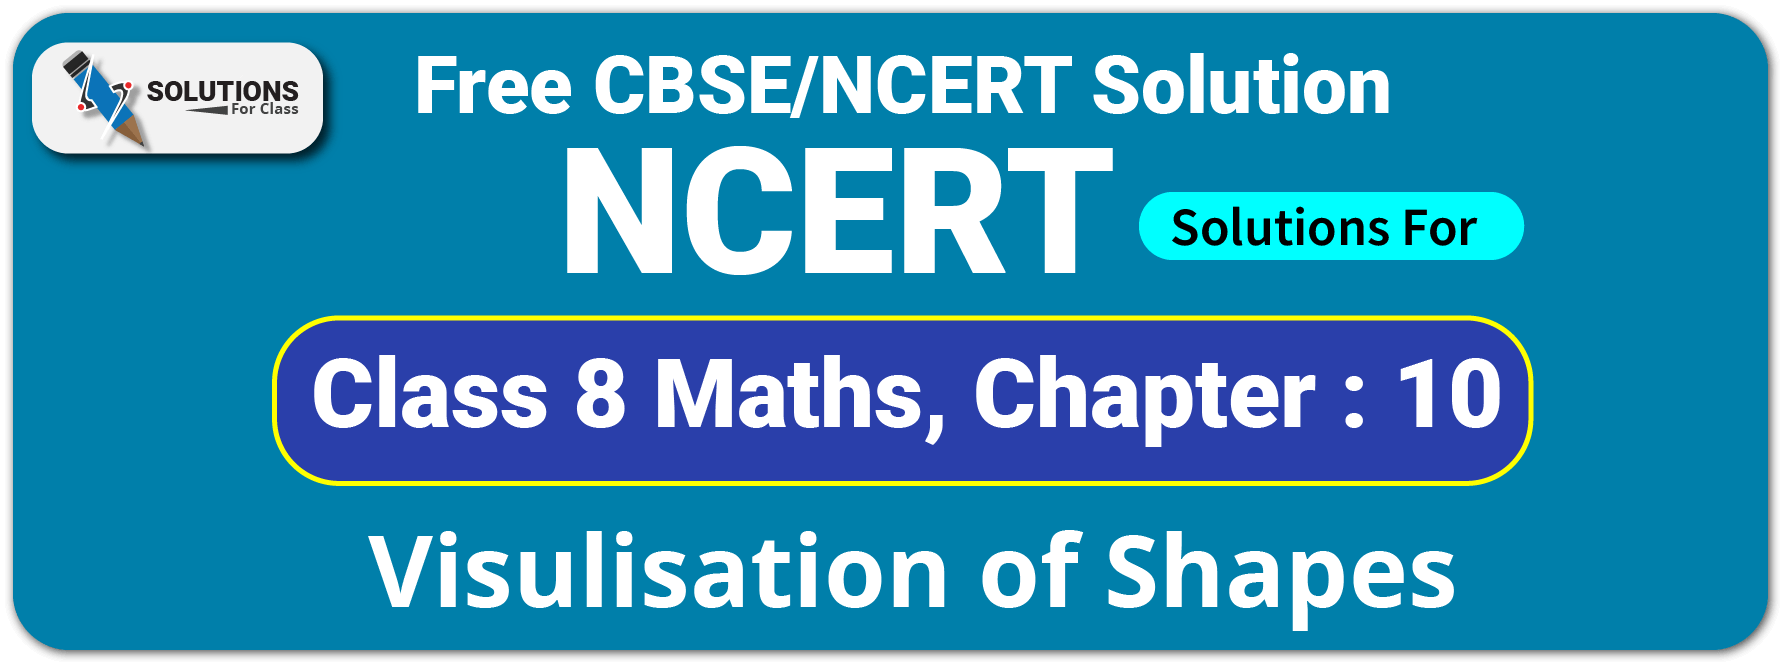 NCERT Solutions For Class 8 Chapter 10, Visulisation of Shapes